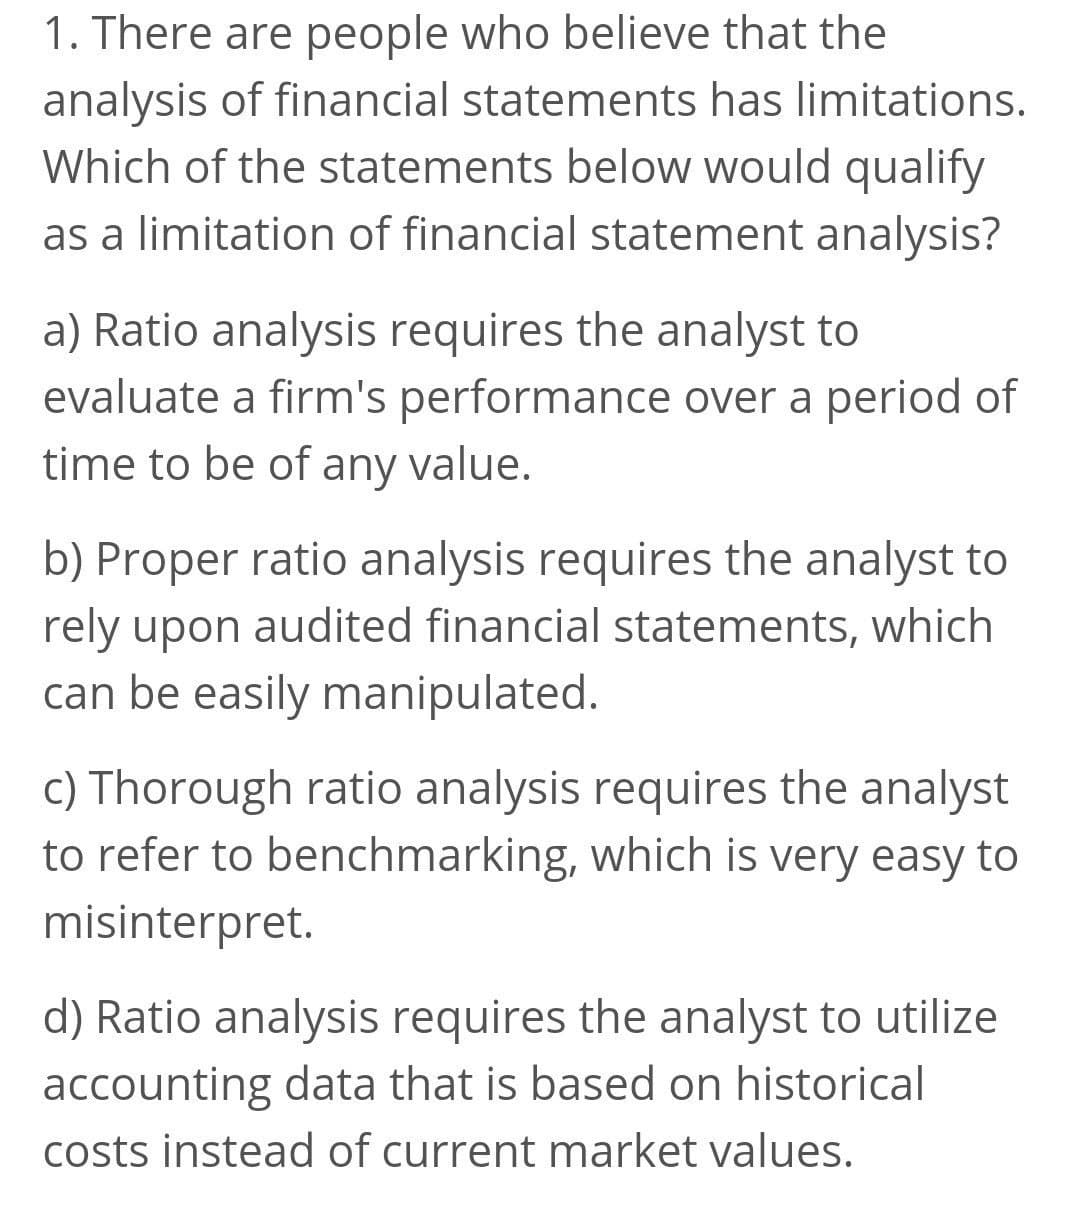 1. There are people who believe that the
analysis of financial statements has limitations.
Which of the statements below would qualify
as a limitation of financial statement analysis?
a) Ratio analysis requires the analyst to
evaluate a firm's performance over a period of
time to be of any value.
b) Proper ratio analysis requires the analyst to
rely upon audited financial statements, which
can be easily manipulated.
c) Thorough ratio analysis requires the analyst
to refer to benchmarking, which is very easy to
misinterpret.
d) Ratio analysis requires the analyst to utilize
accounting data that is based on historical
costs instead of current market values.
